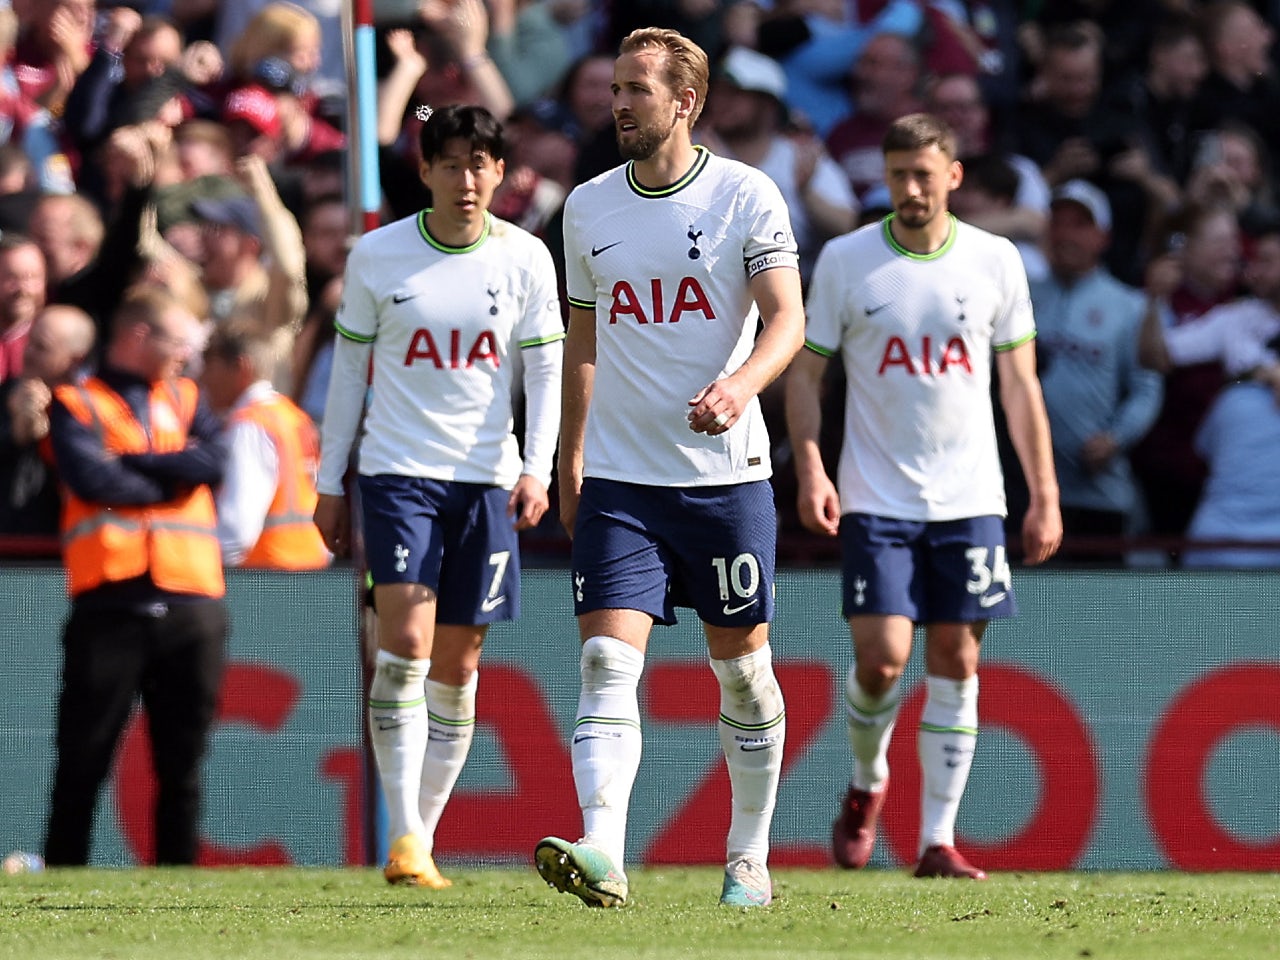 Crystal Palace vs Tottenham Hotspur live score, H2H and lineups